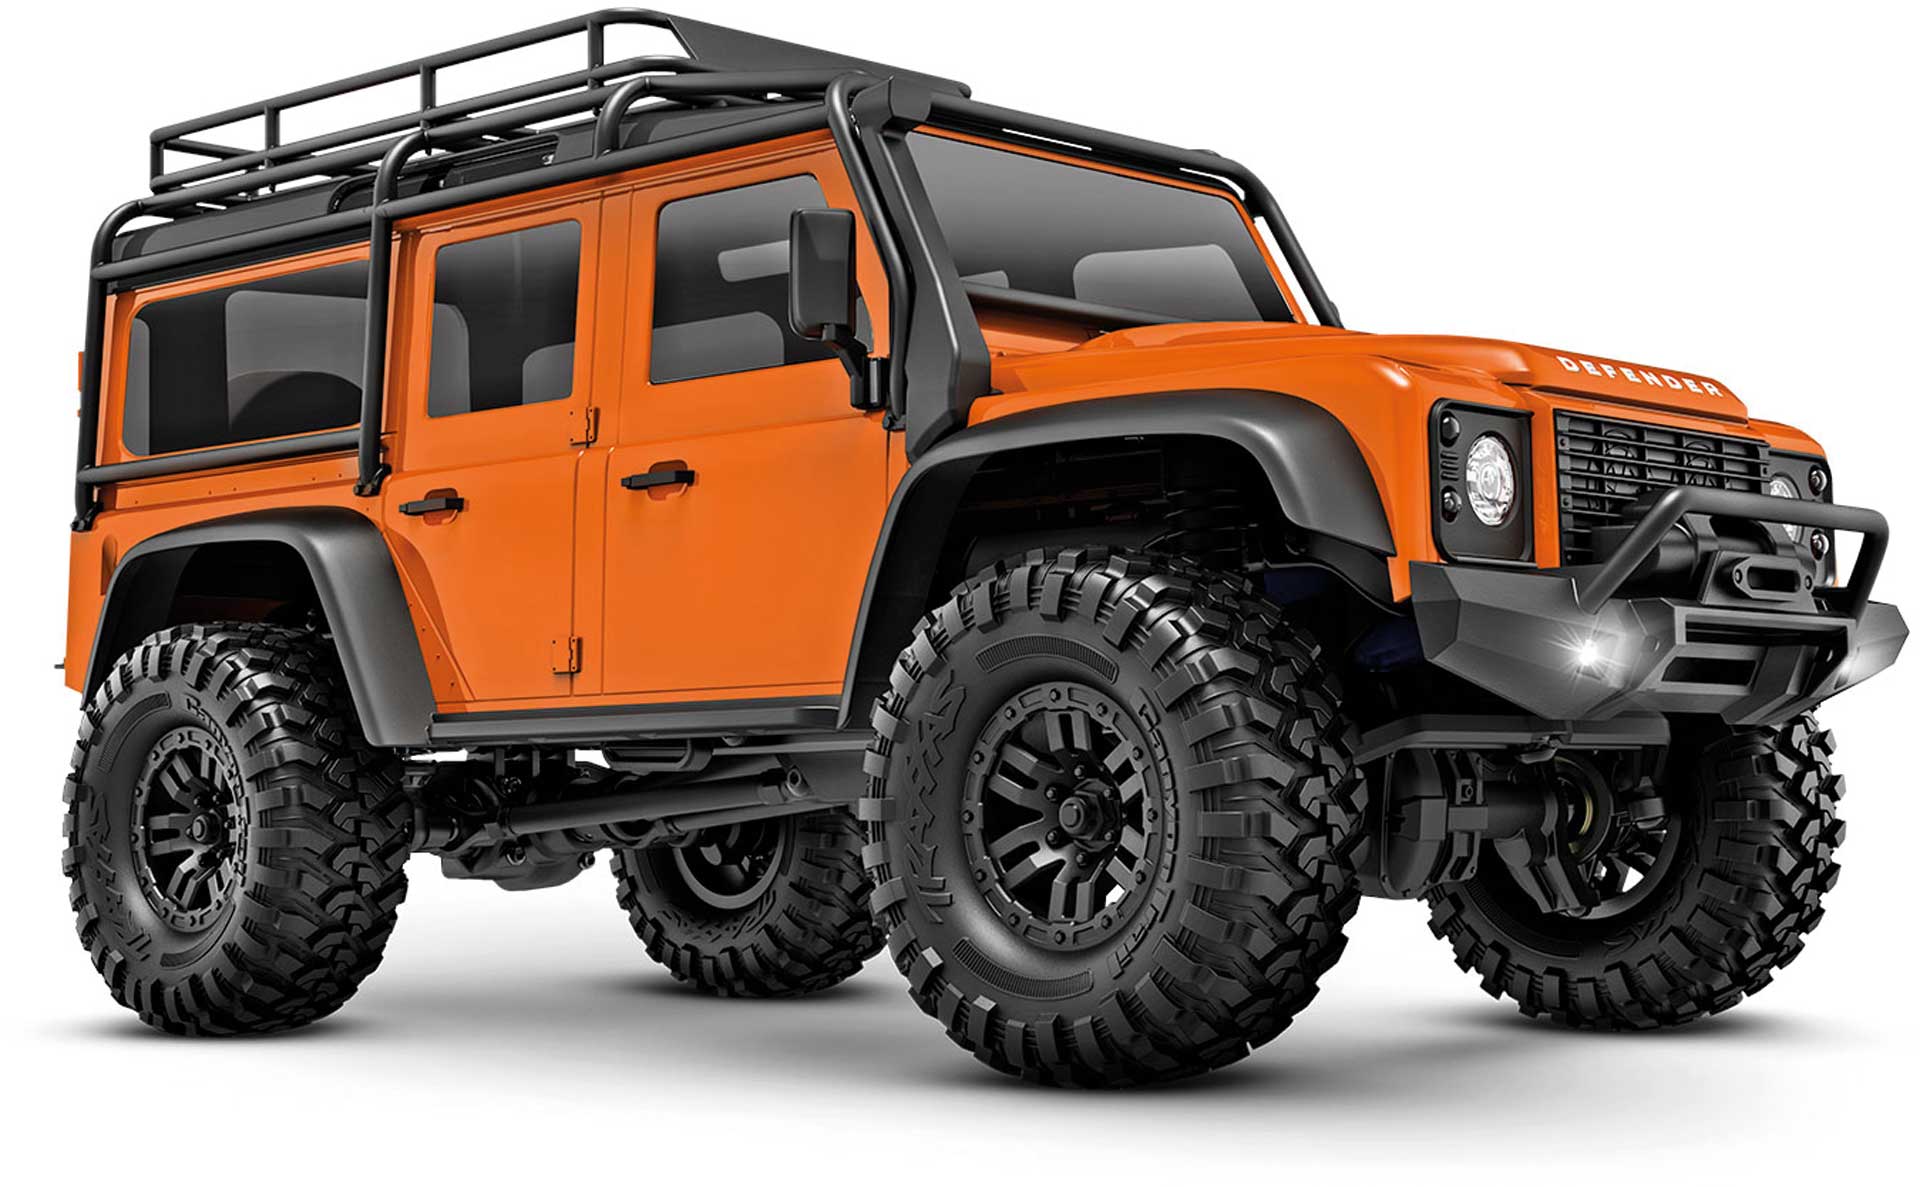 TRAXXAS TRX-4M Land Rover Defender orange 1/18 RTR Scale Crawler incl. battery/charger